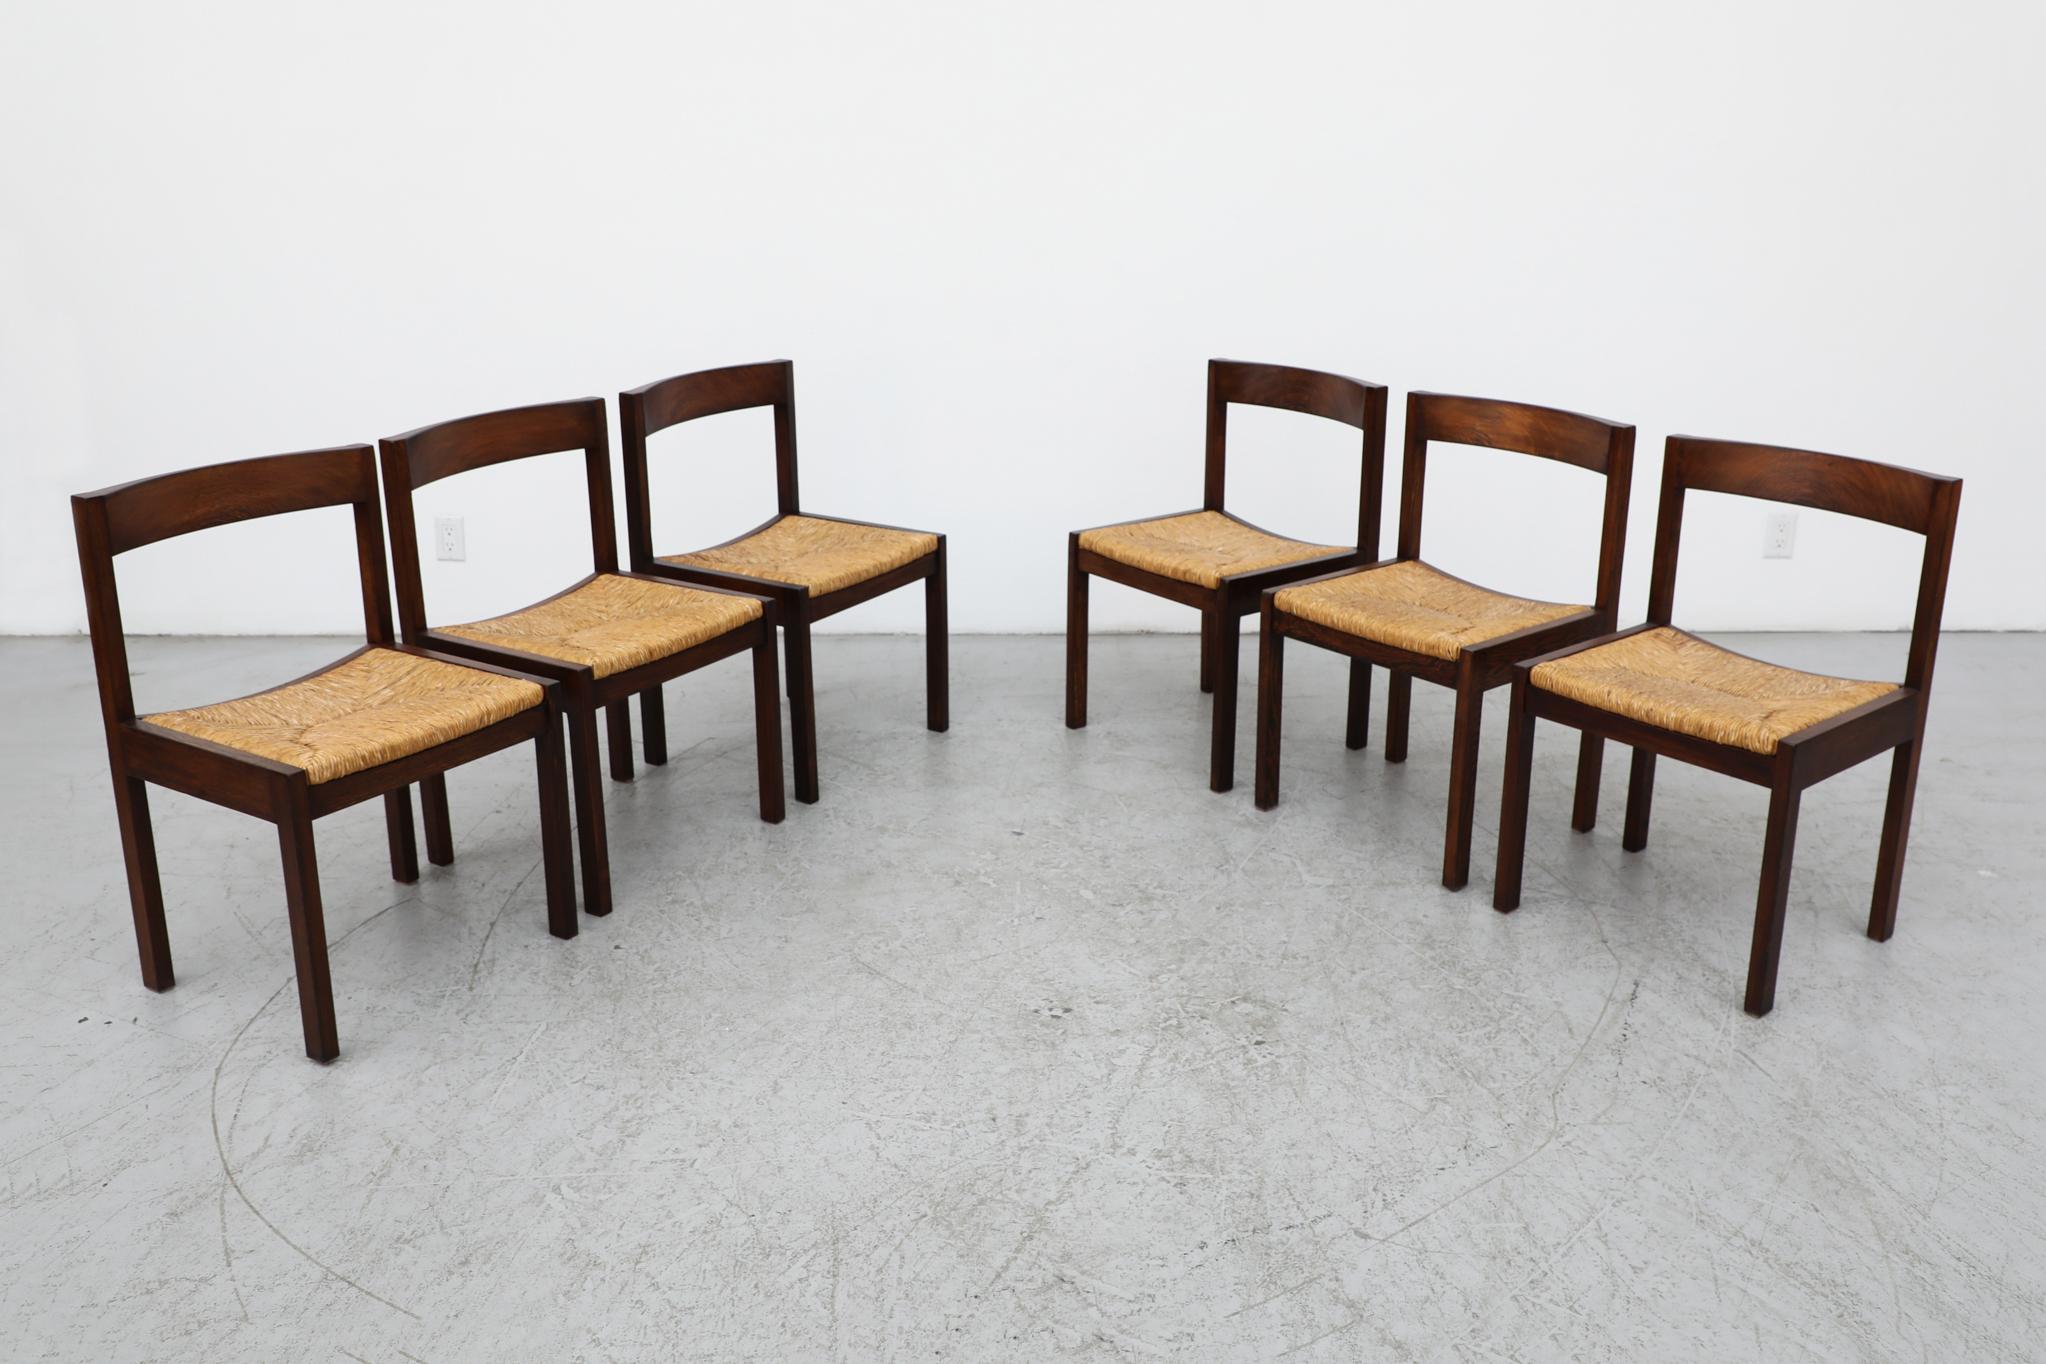 Woven Set of 6 Martin Visser 'SE85' Rush and Wenge Dining Chairs for 't Spectrum